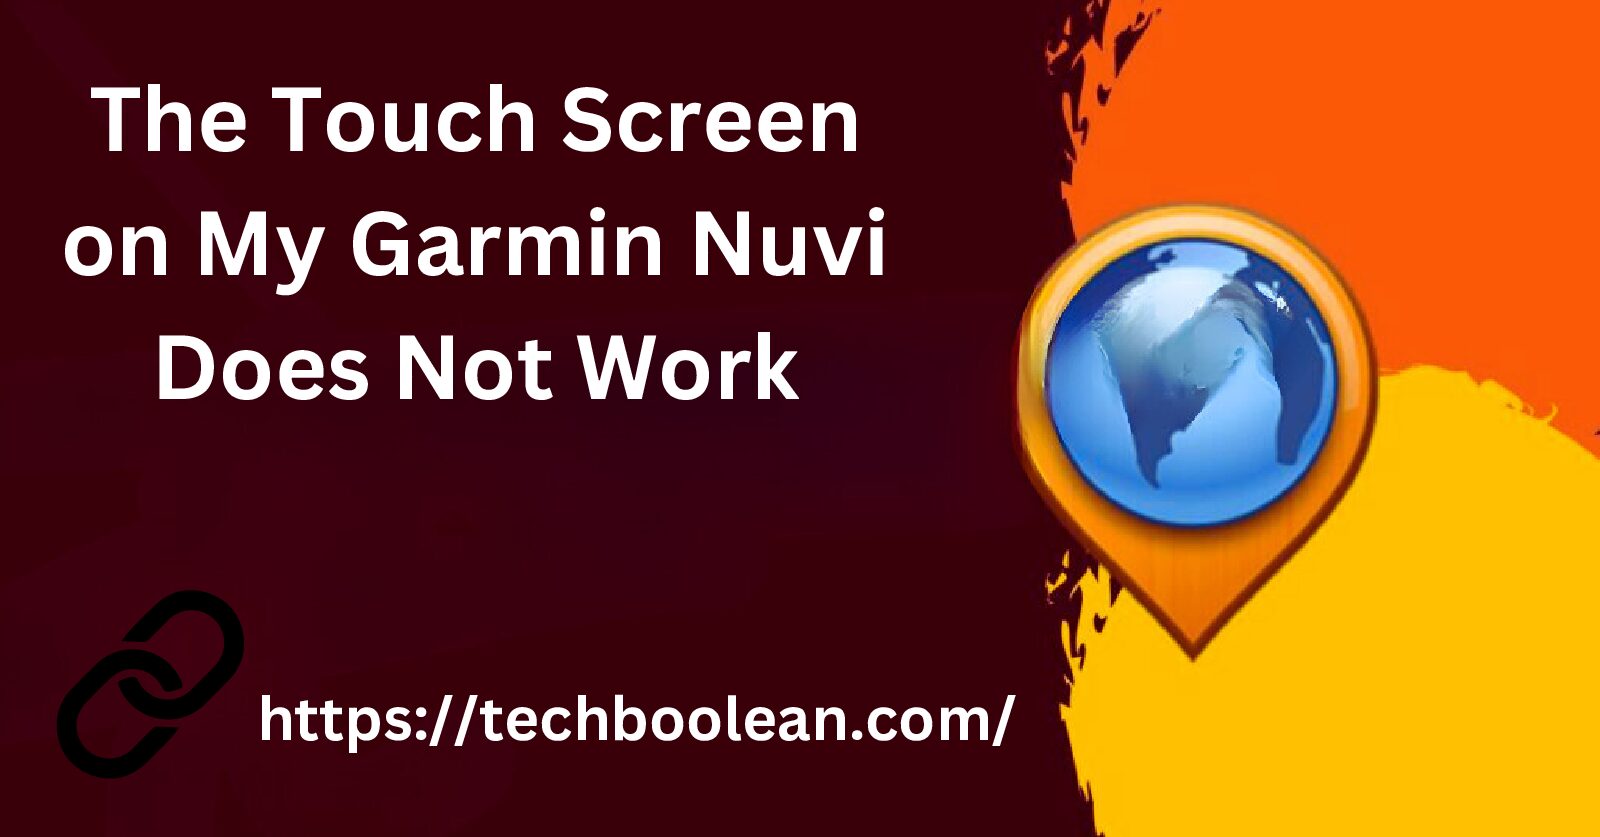 The Touch Screen on My Garmin Nuvi Does Not Work